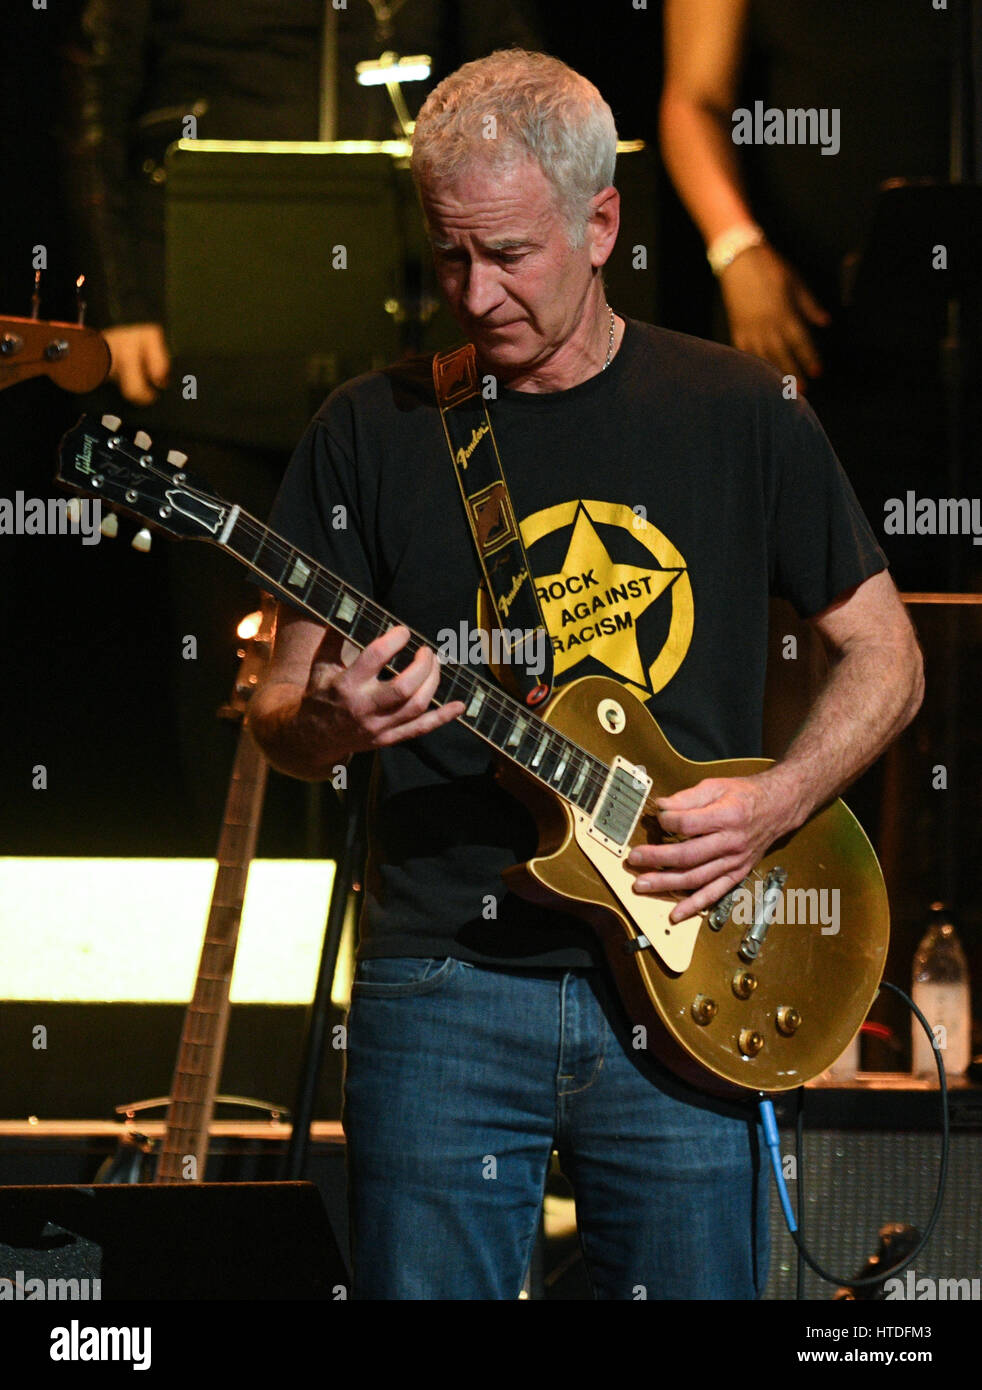 NEW YORK, NY - March 9 : John McEnroe performs on stage at 'Love Rocks NYC! A Change is Gonna Come: Celebrating Songs of Peace, Love and Hope' A Benefit Concert for God's Love We Deliver at Beacon Theatre on March 9, 2017 in New York City. @John Palmer/Media Punch Stock Photo